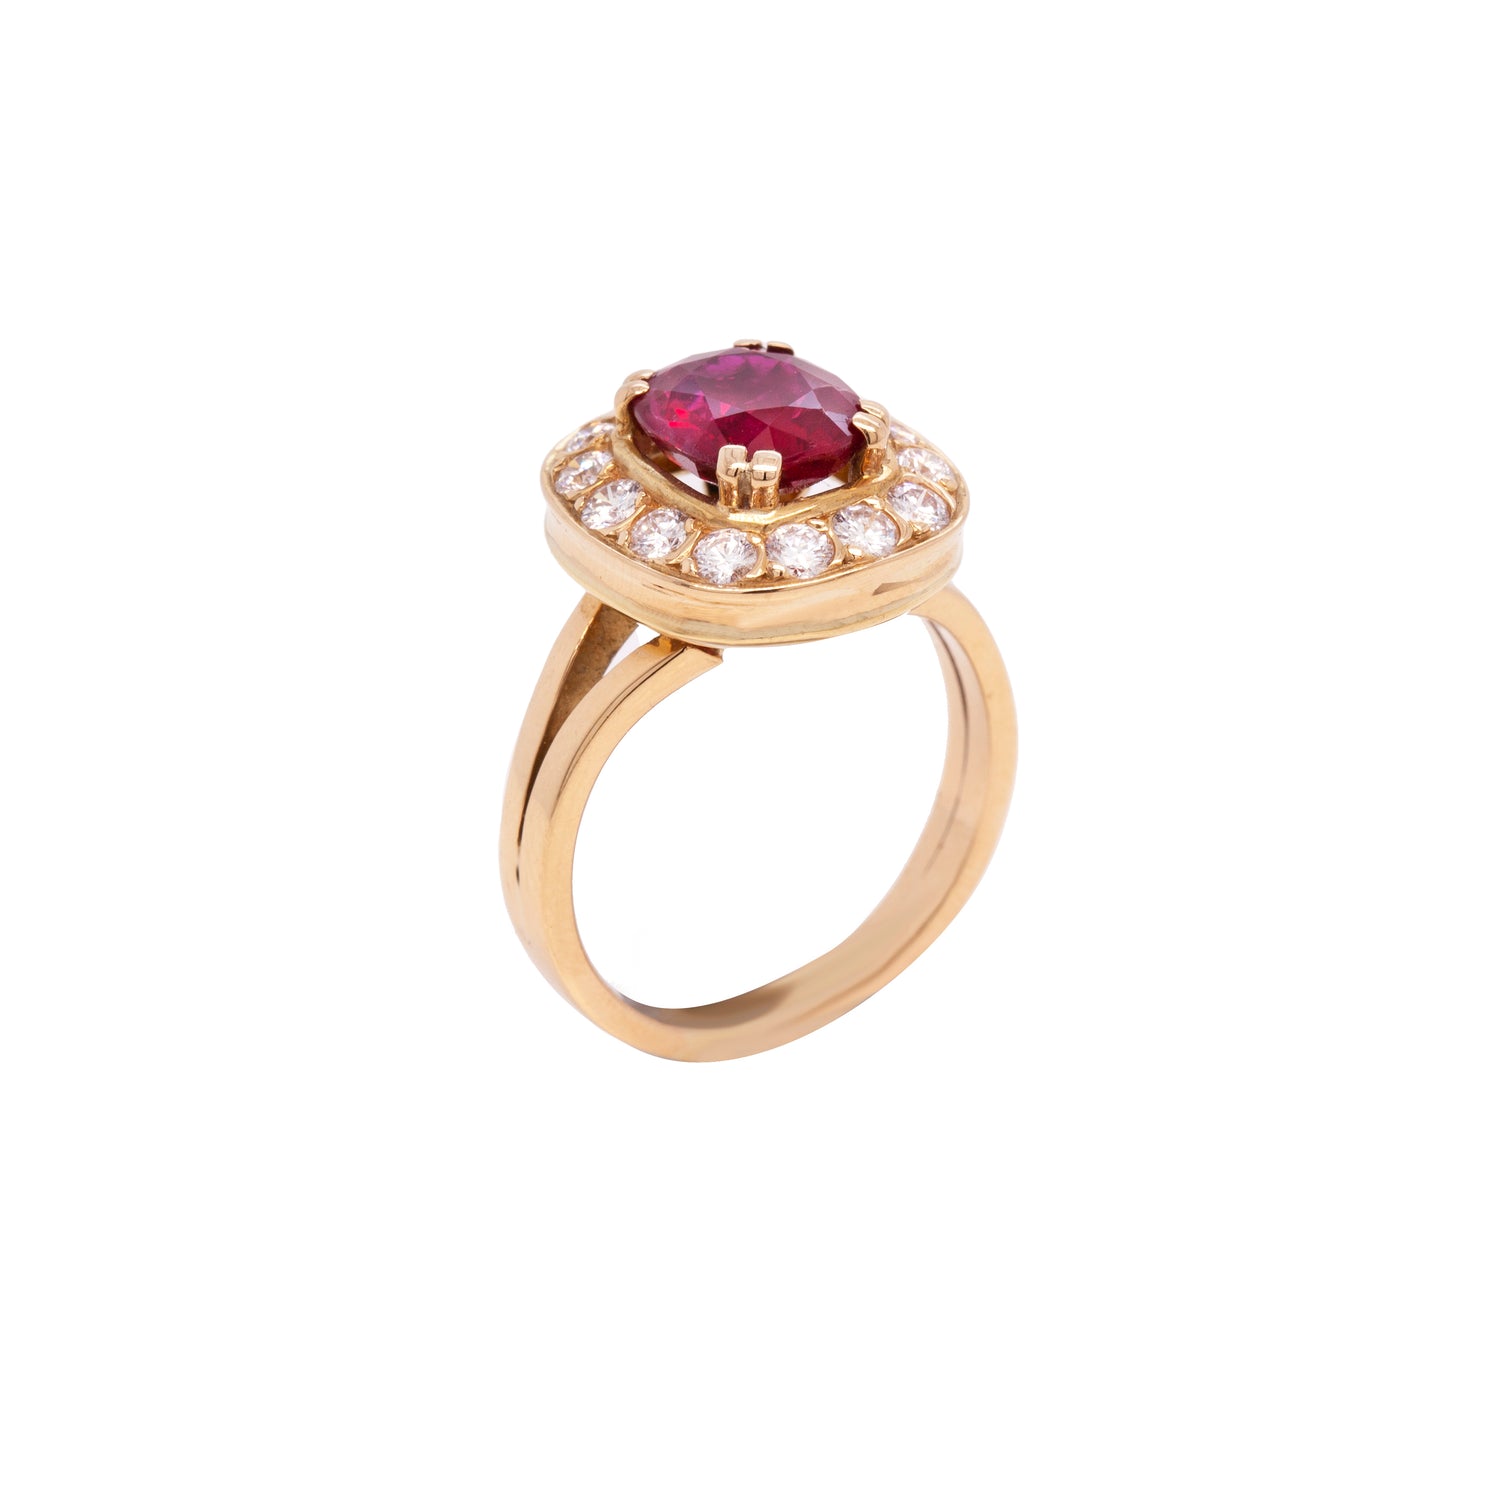 Ruby and Diamond 18 Carat Yellow Gold Cluster Engagement Ring